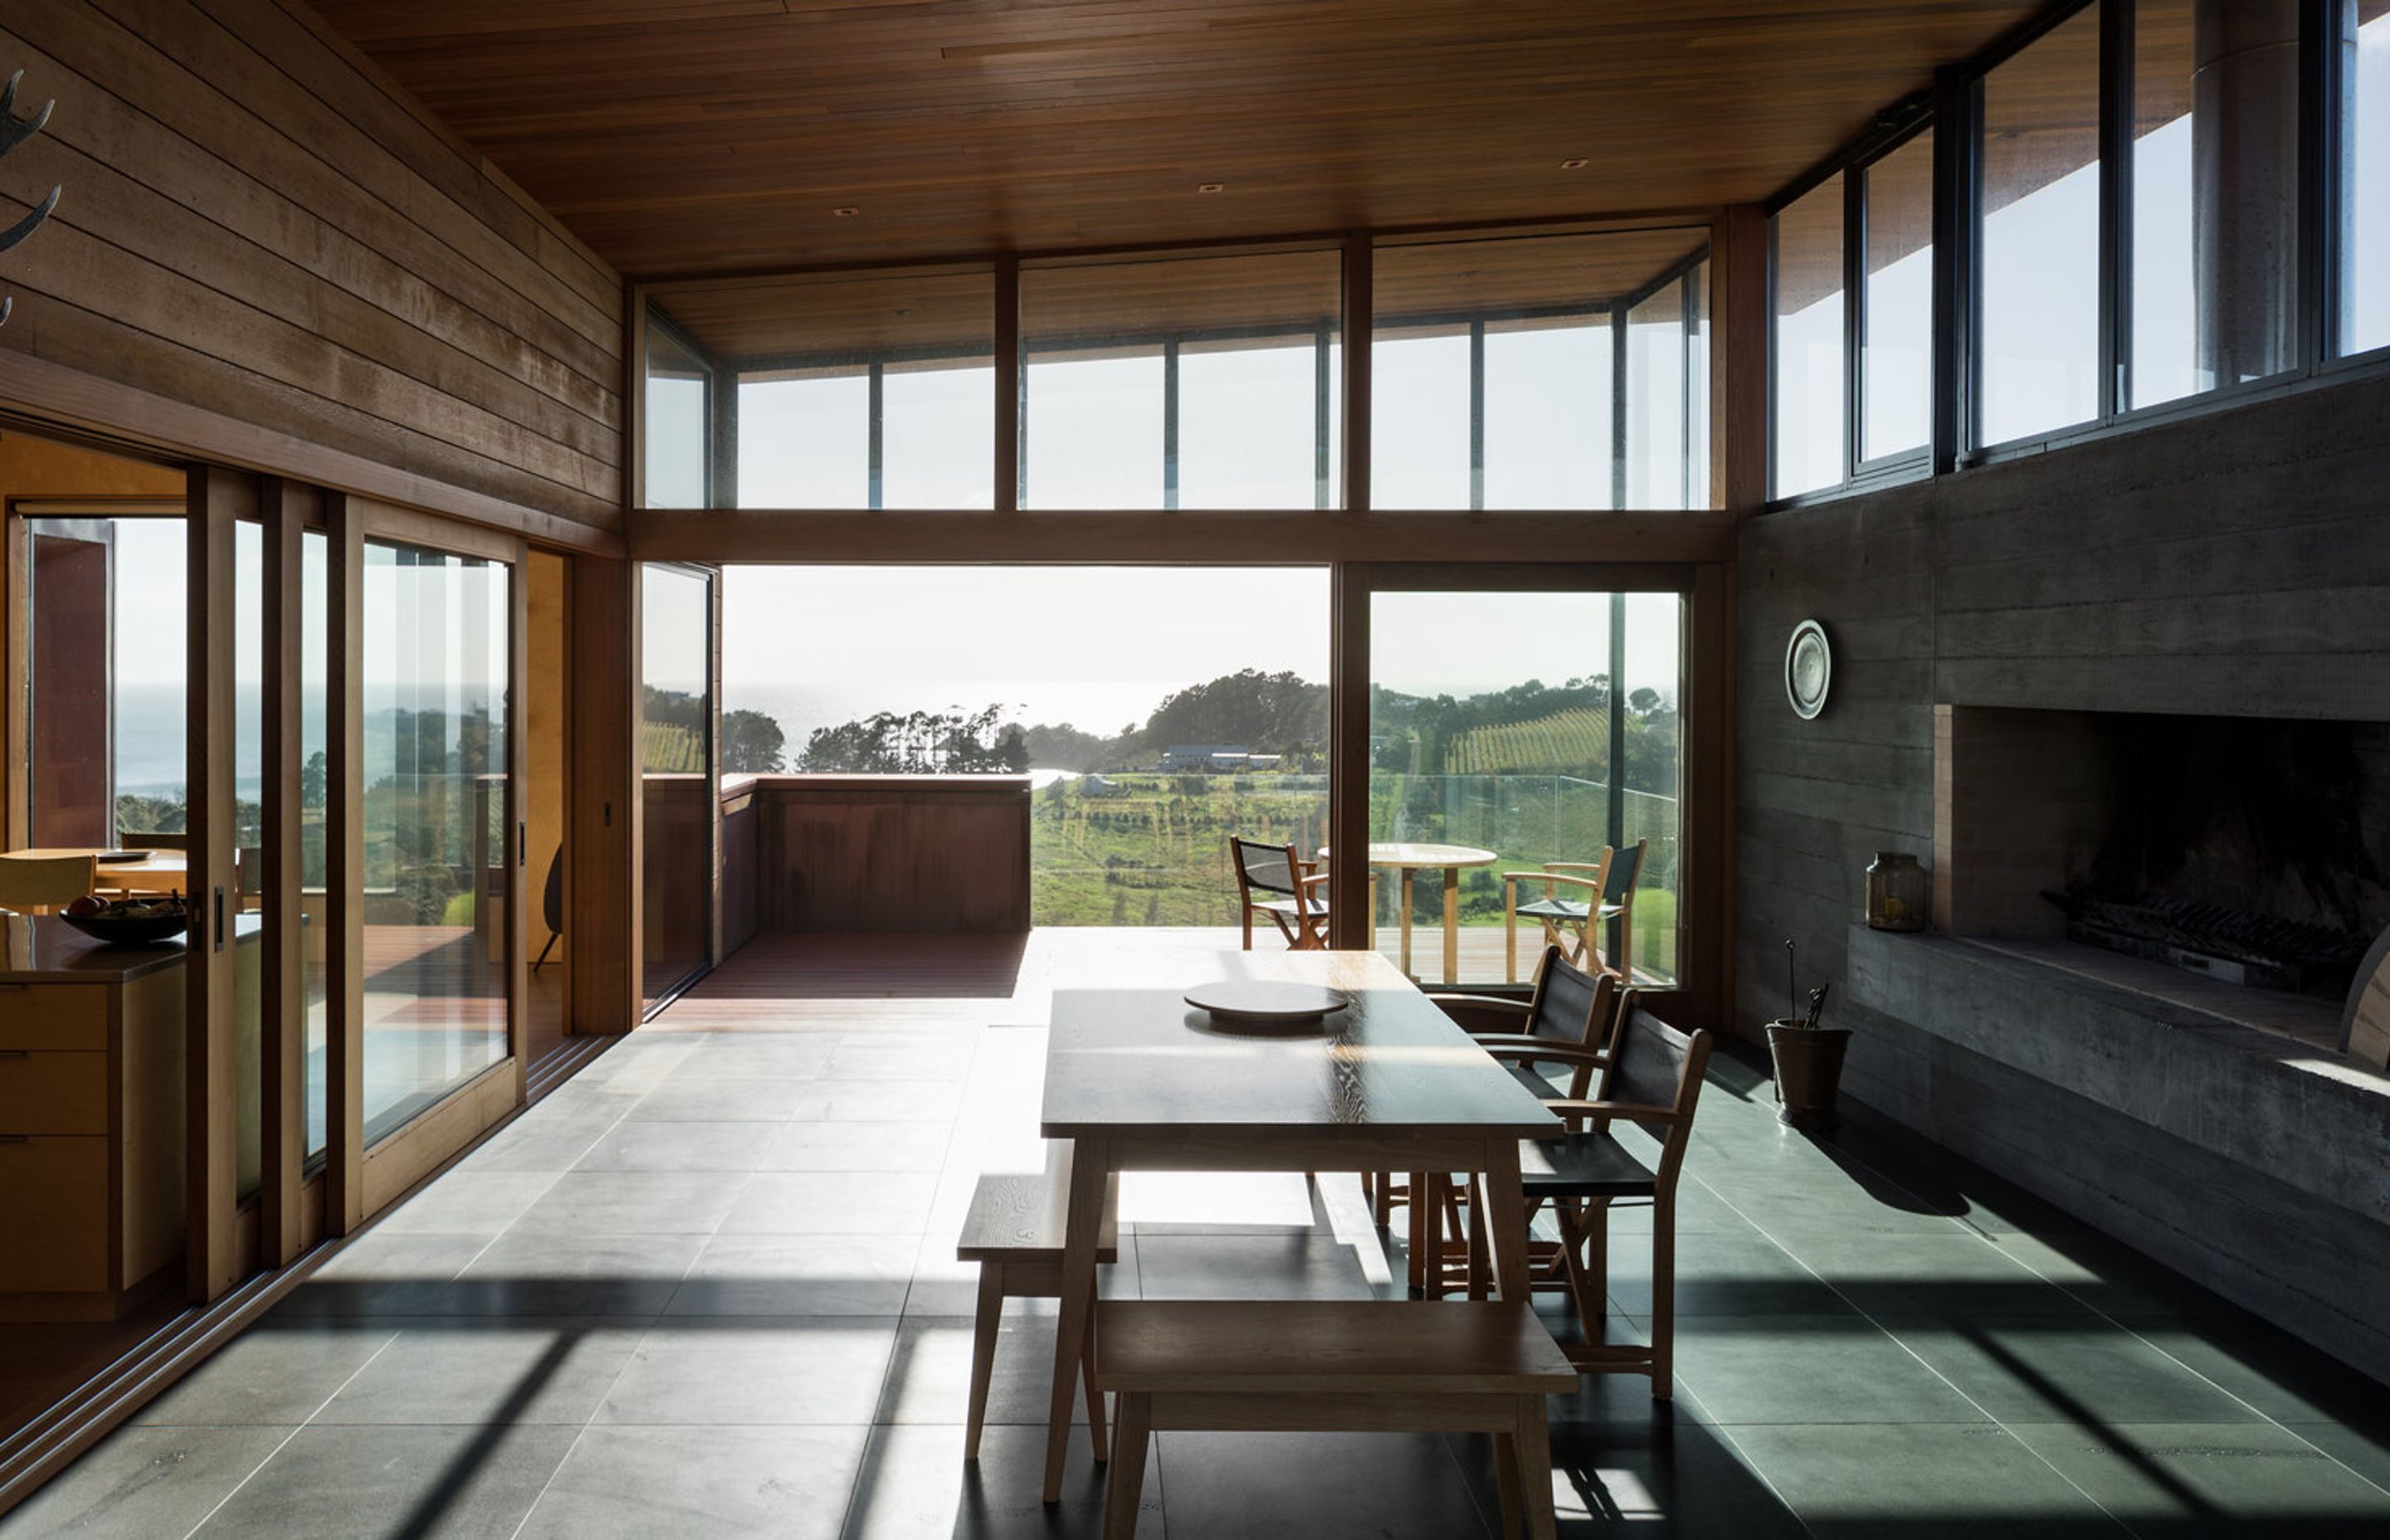 Looking through the entertainment room, across the balcony to expansive views over a vineyard of Syrah grapes, Oneroa Bay to the right and bush to the east.